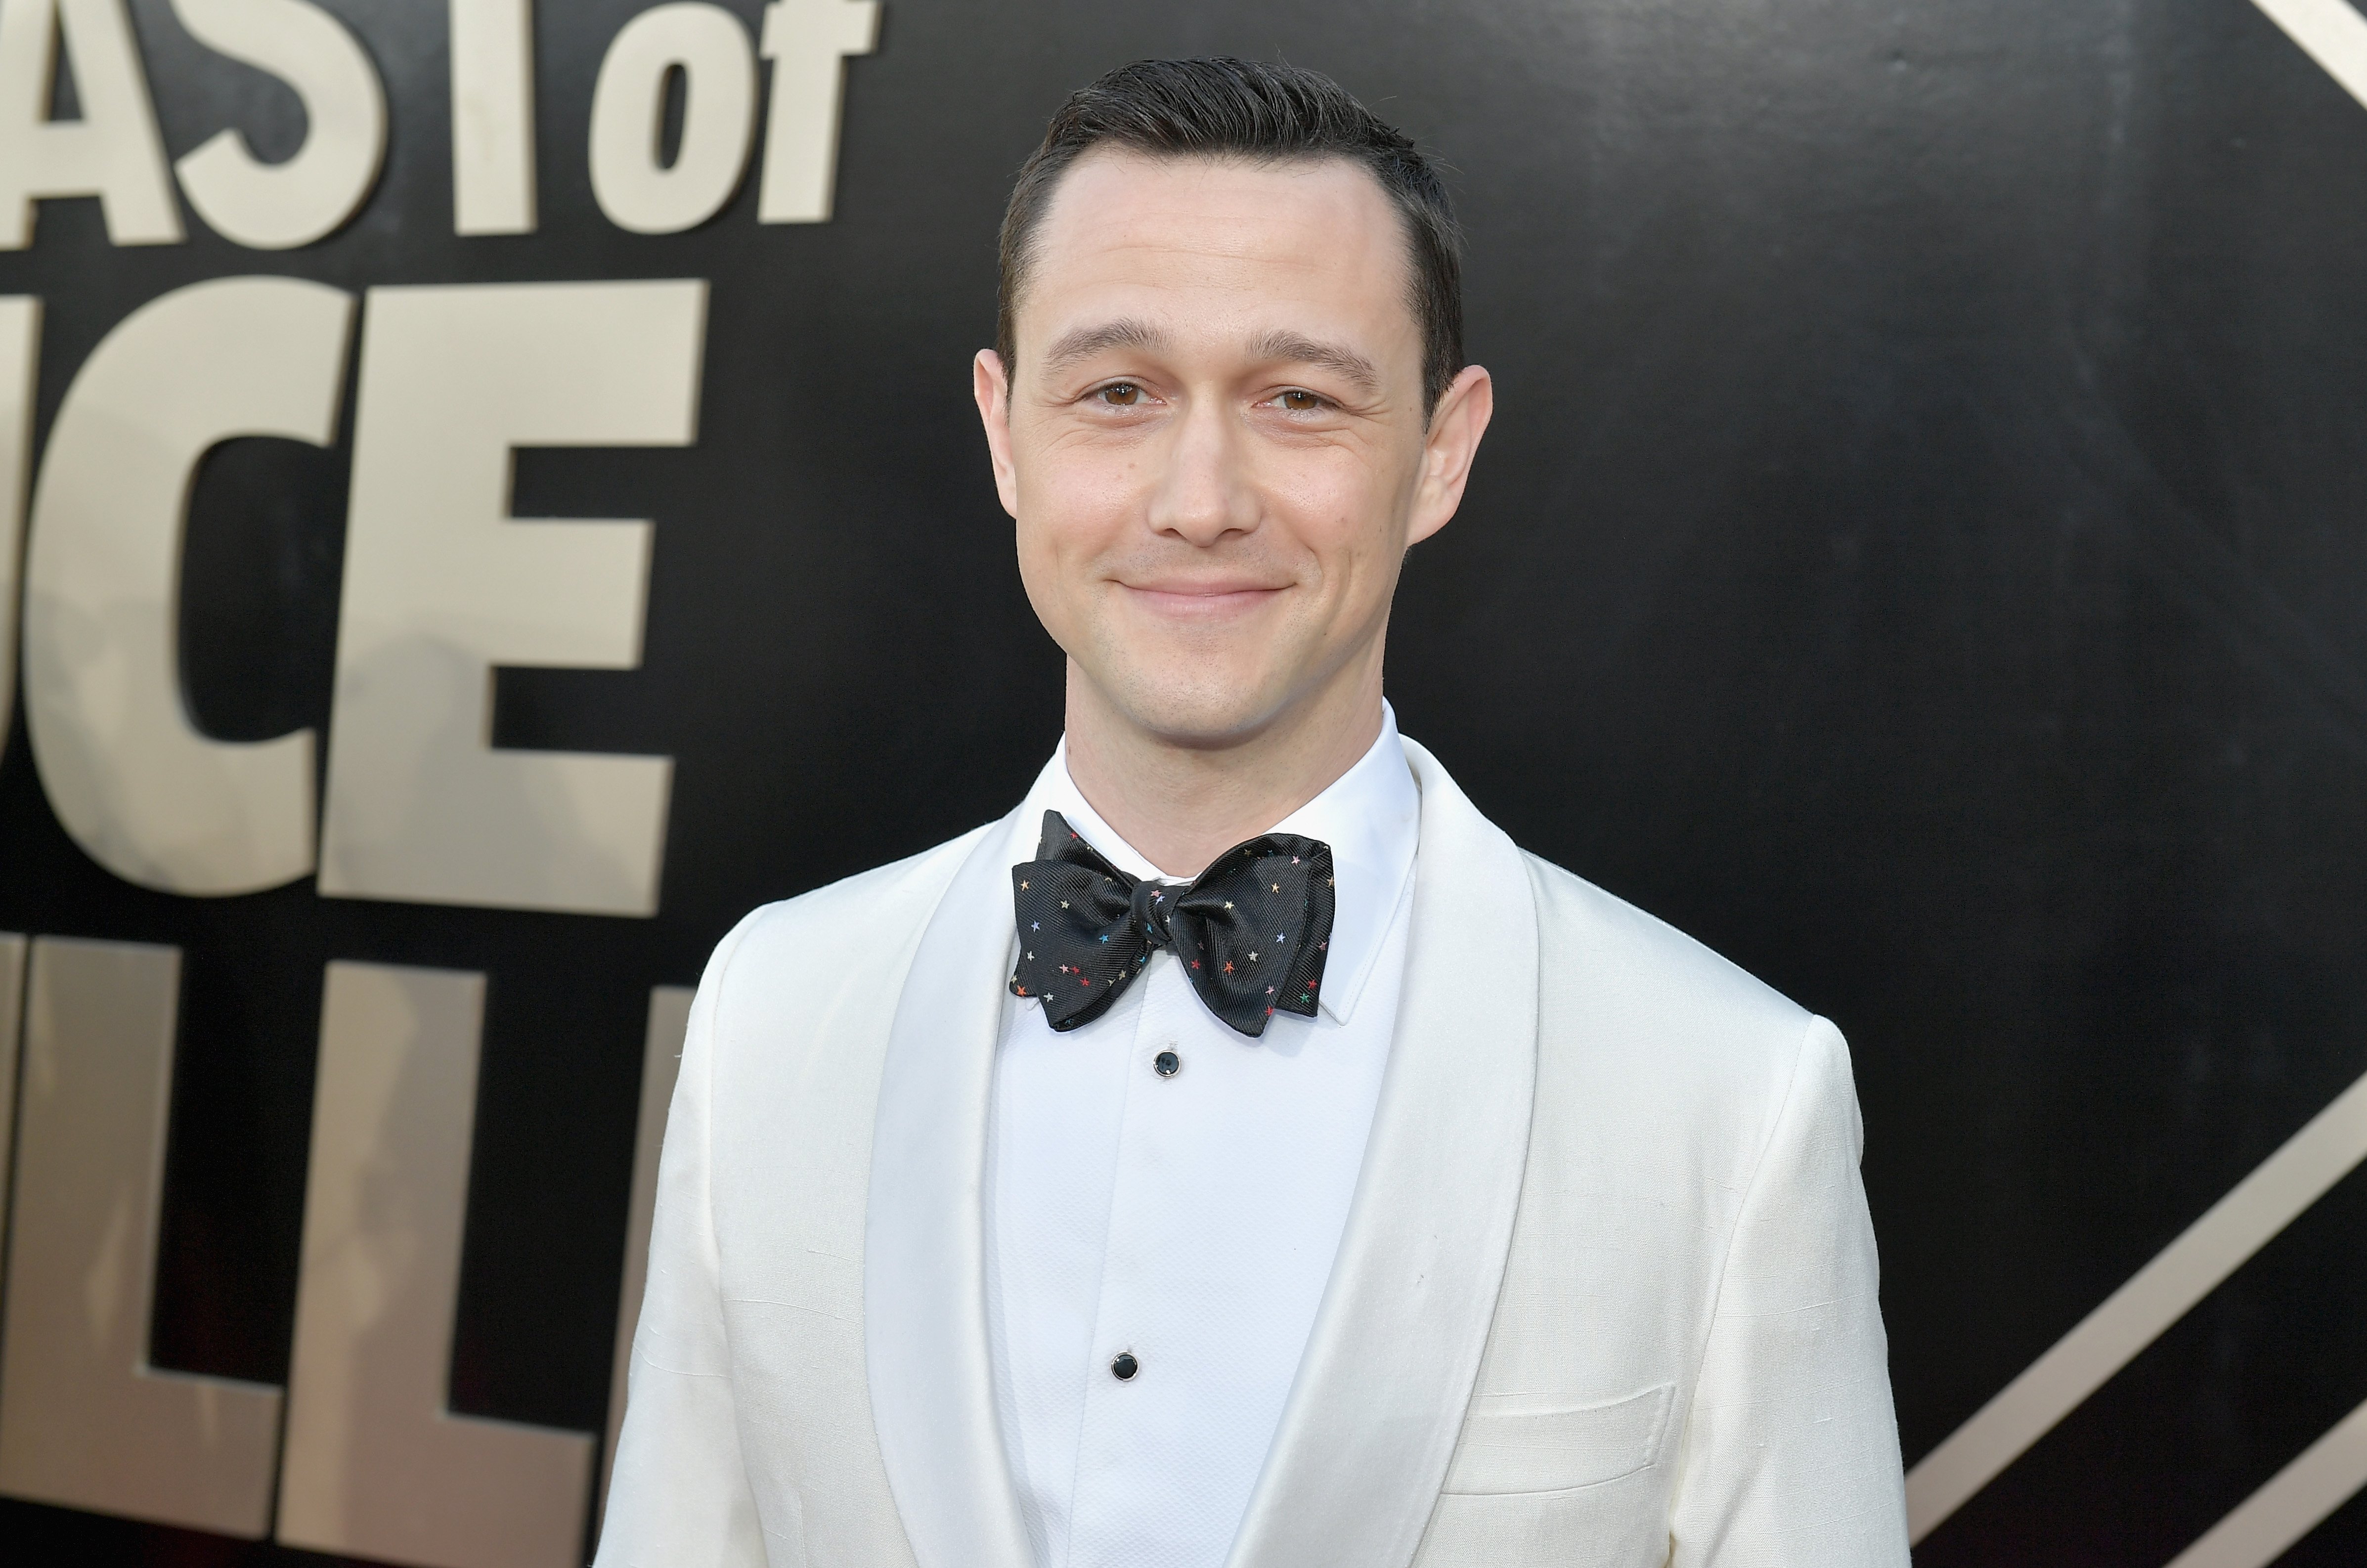 Joseph Gordon-Levitt attends the Comedy Central Roast of Bruce Willis on July 14, 2018, in Los Angeles, California. | Source: Getty Images